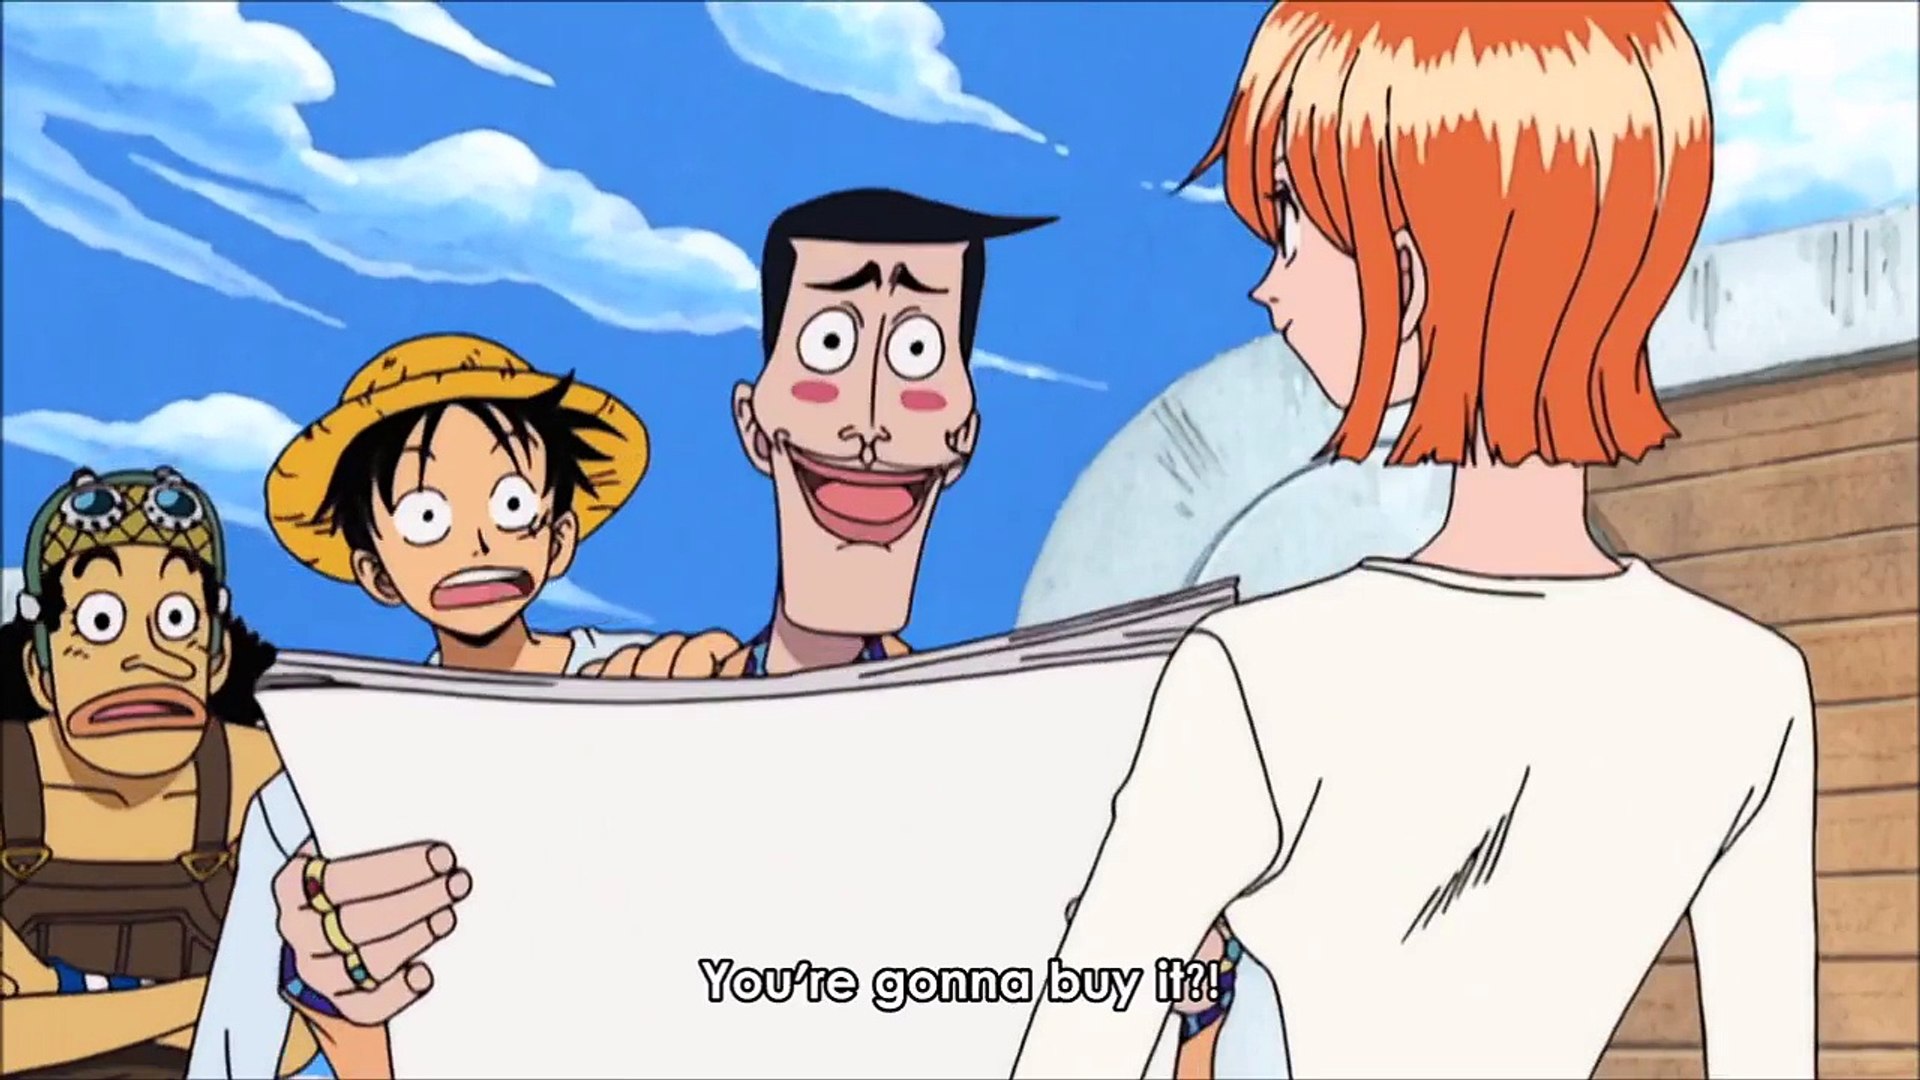 Nami will pay any price for some papers !! - Sanji will hand Luffy